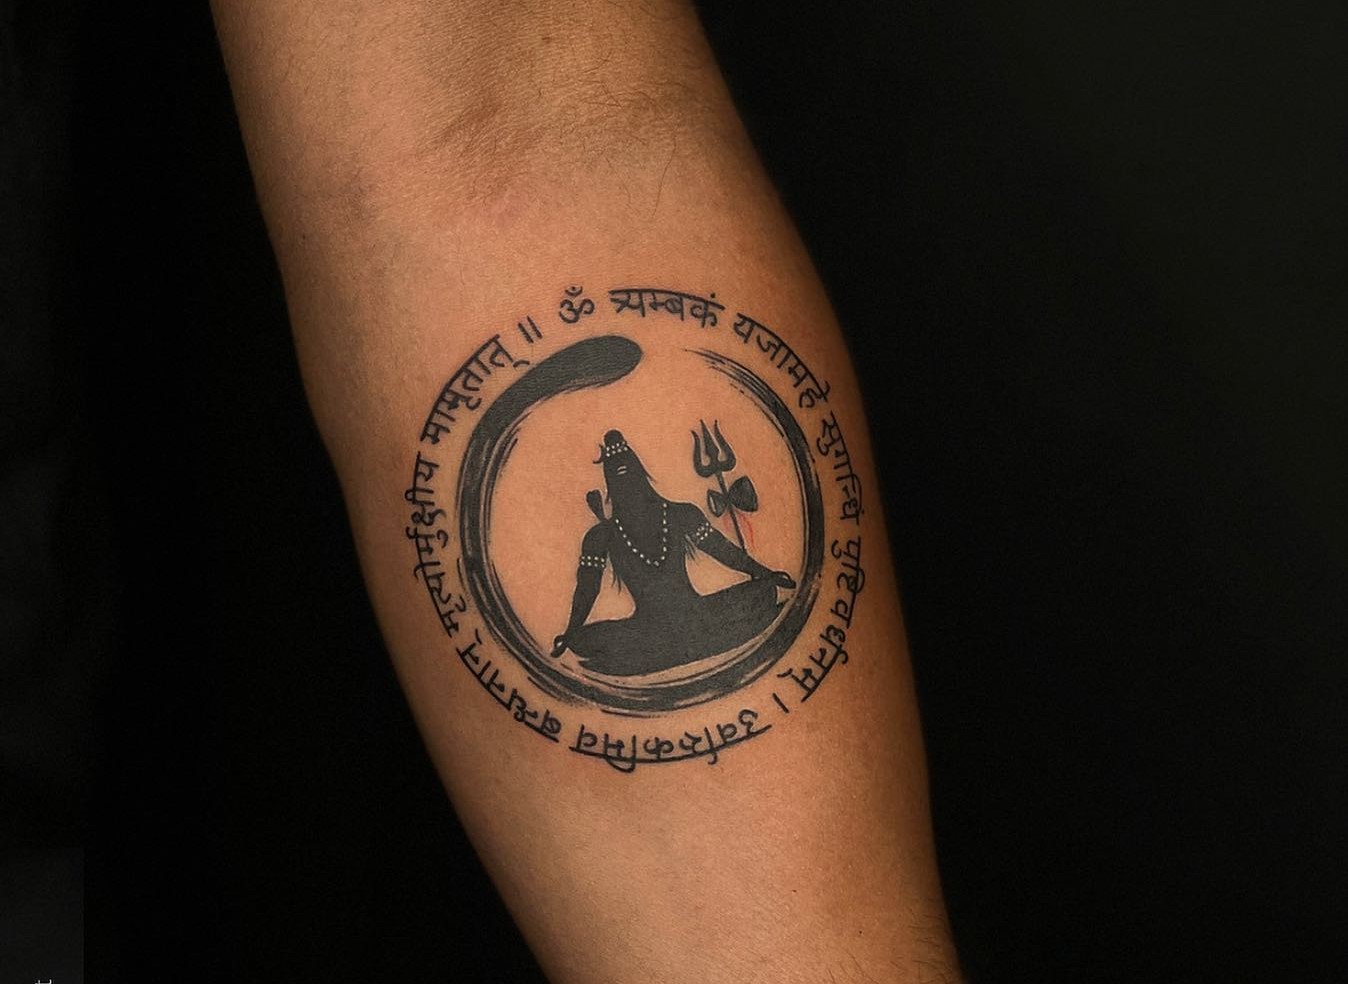 Hide N Seek Tattoo Studio - The swastika symbol, 卐 or 卍, is an ancient  religious icon in the cultures. It is used as a symbol of divinity and  spirituality in Indian